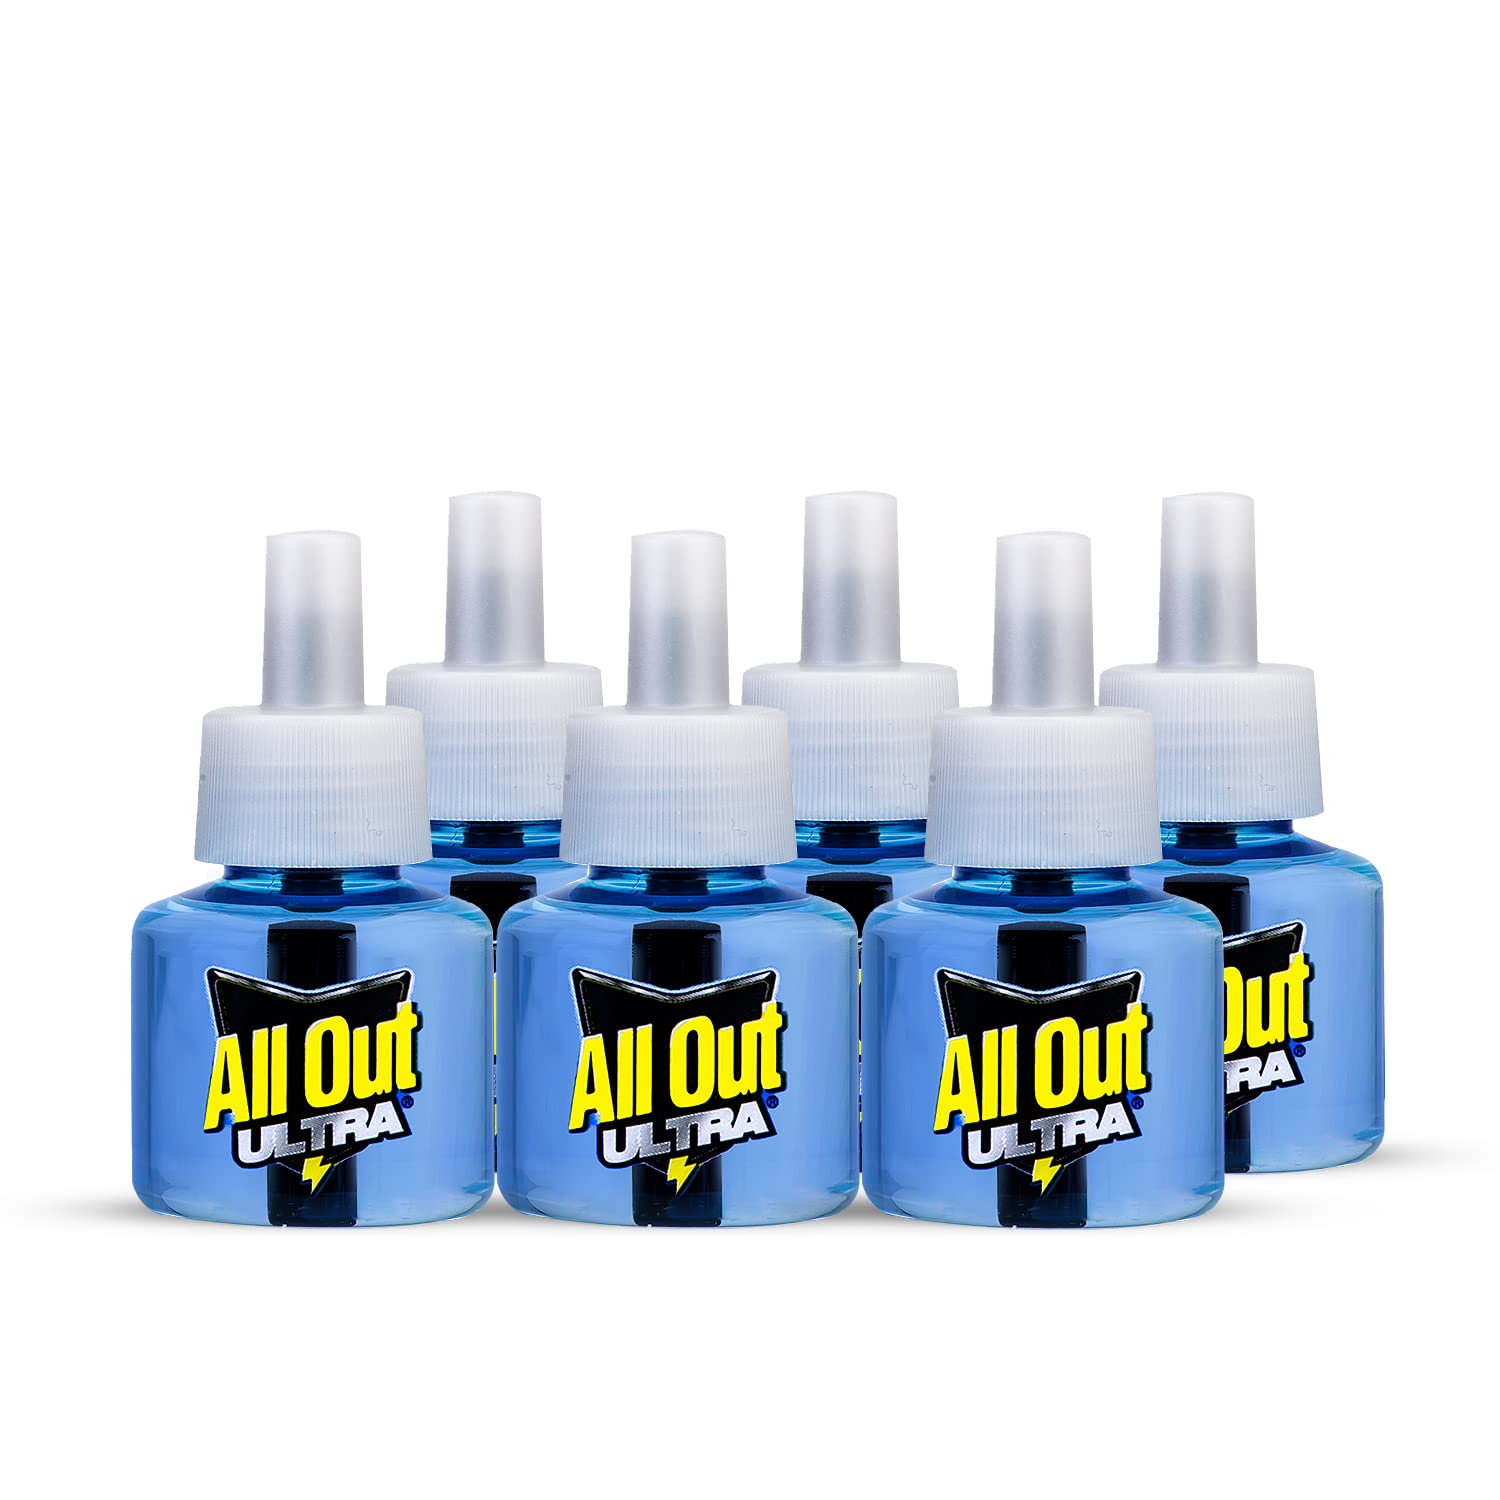 All Out Ultra Mosquito Repellant Refill